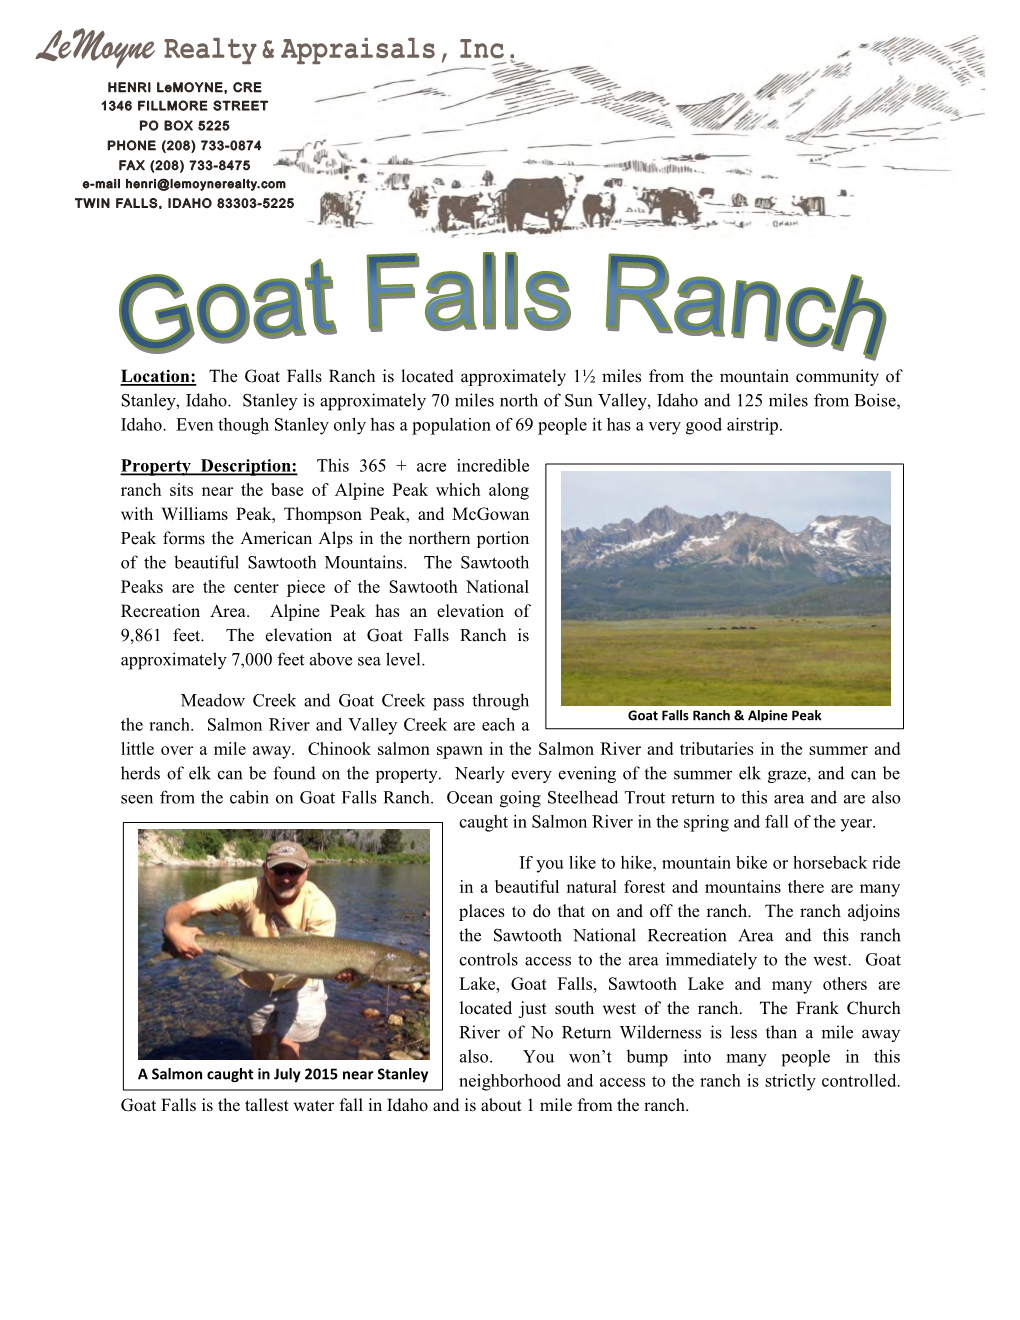 The Goat Falls Ranch Is Located Approximately 1½ Miles from the Mountain Community of Stanley, Idaho. Stanley Is Ap